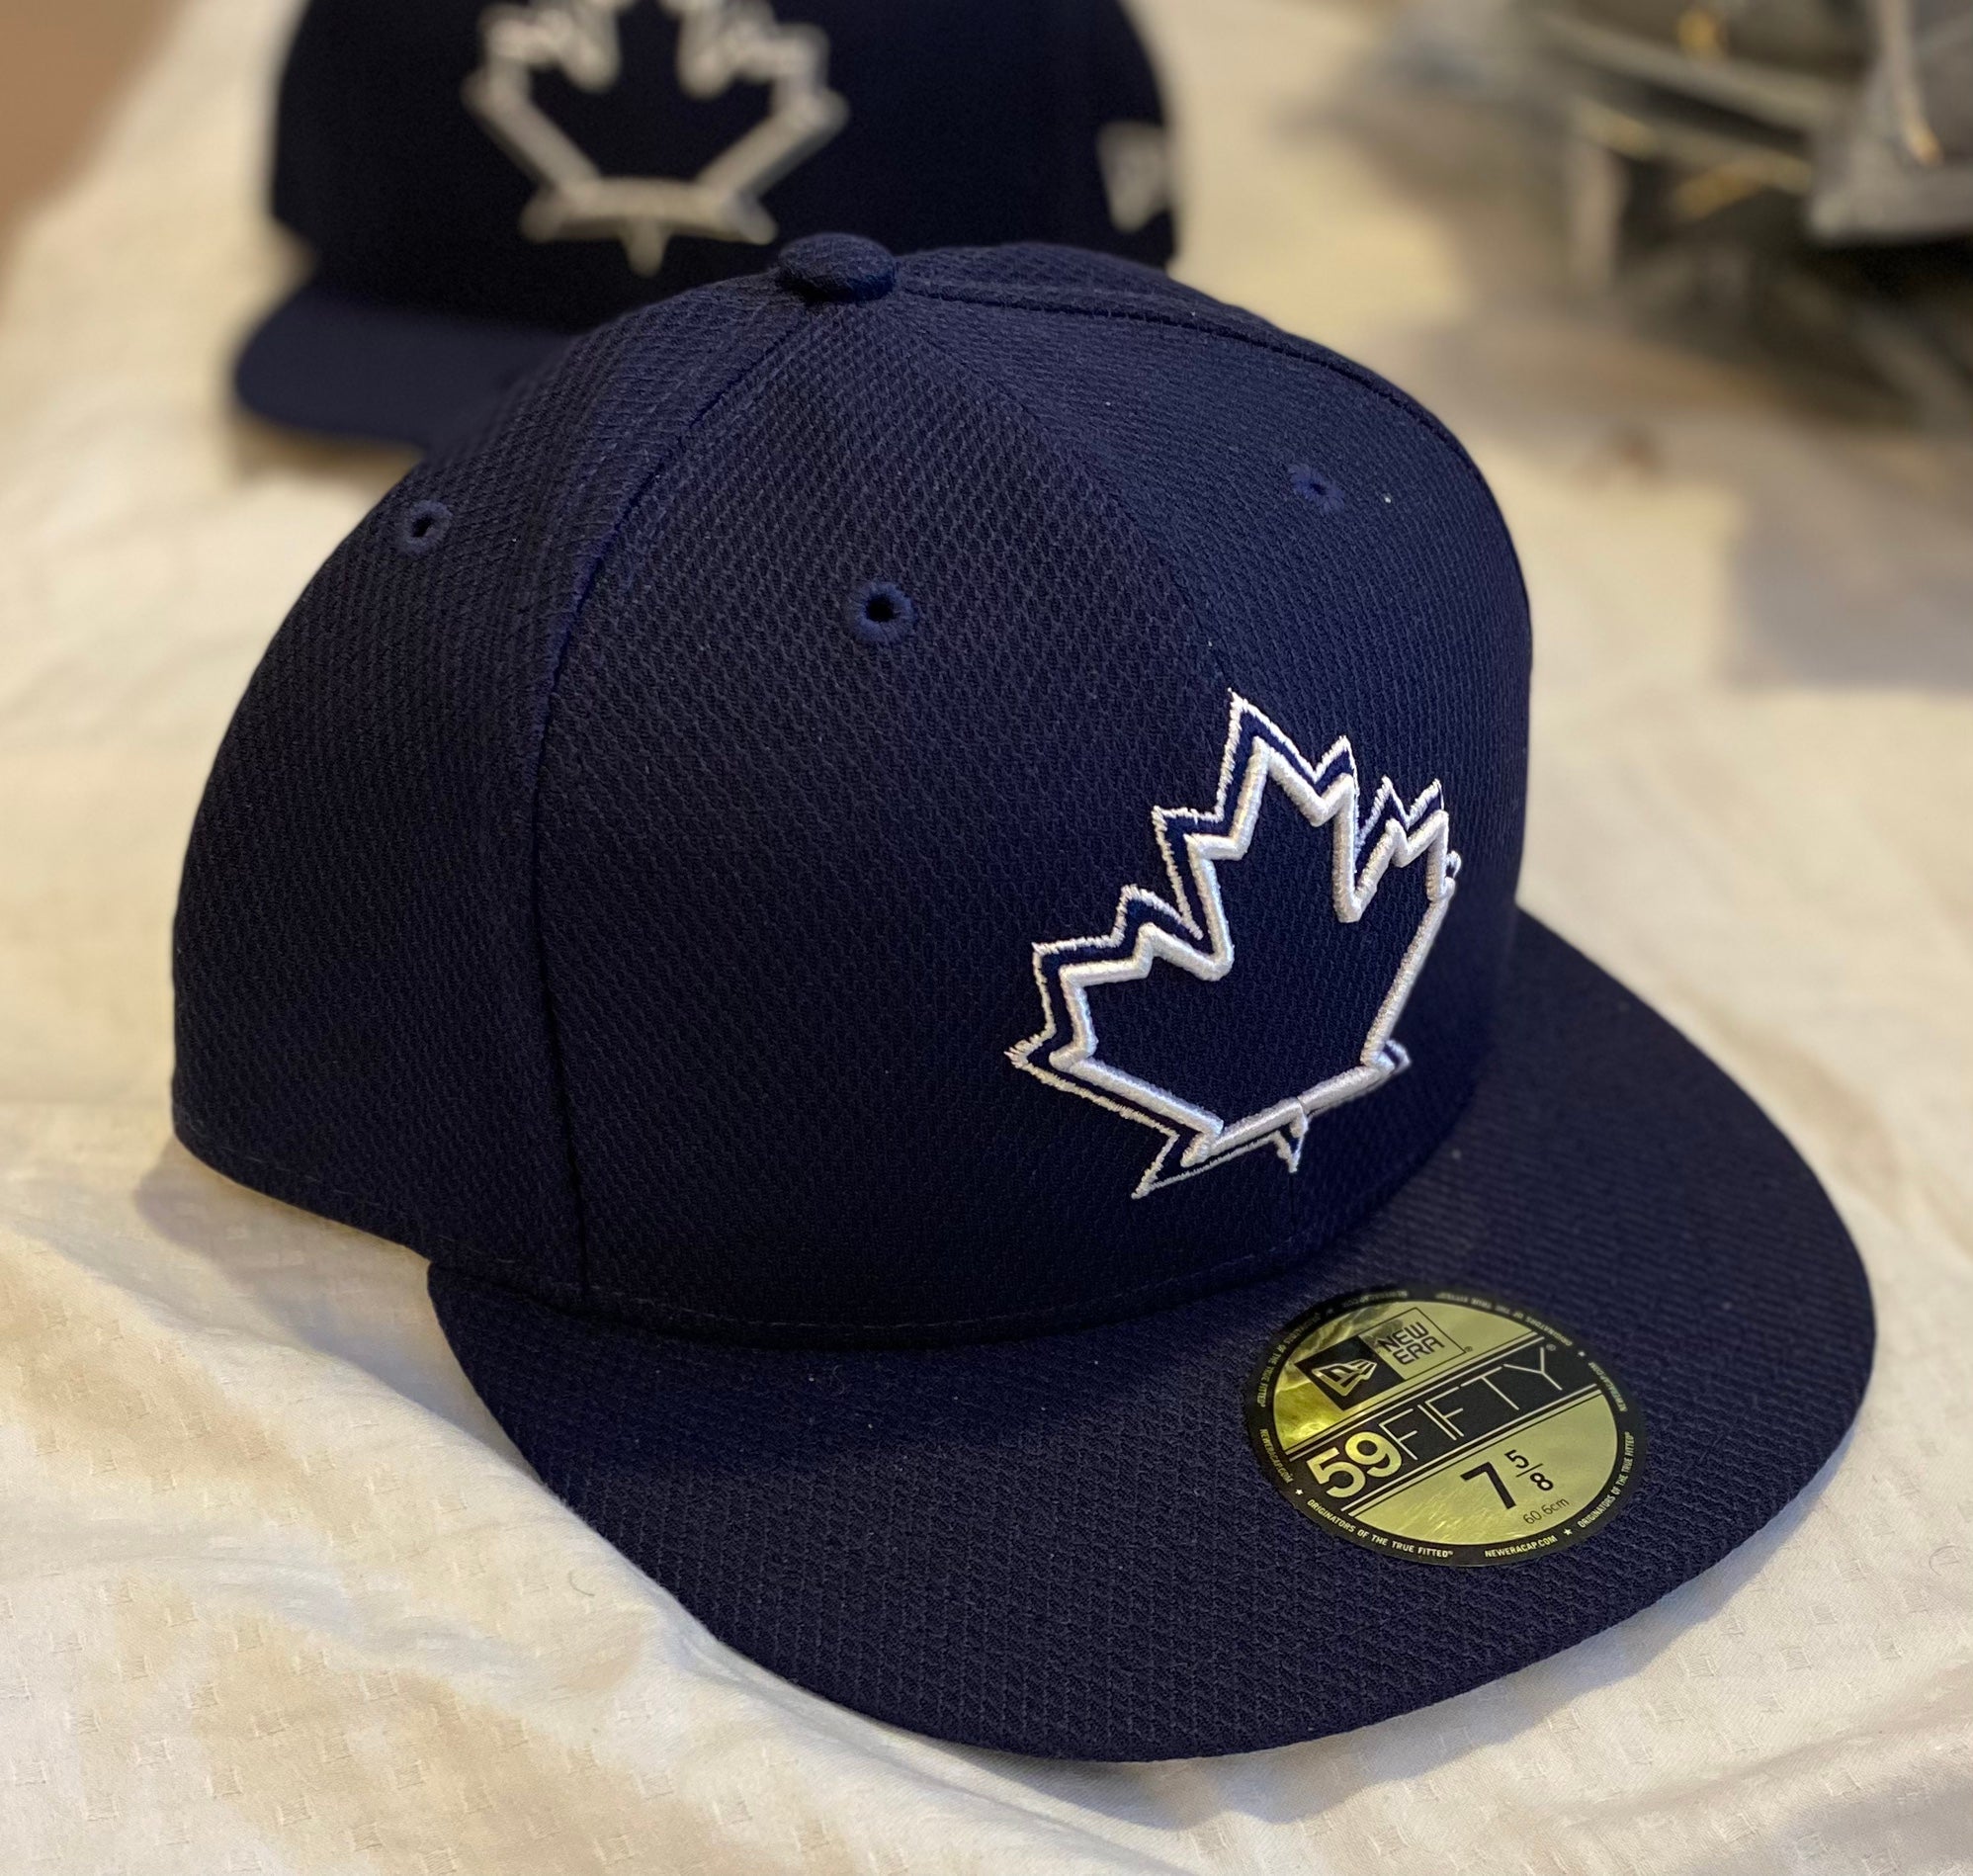 MLB spring training hats and gear: How to get official apparel as pitchers  and catchers report 